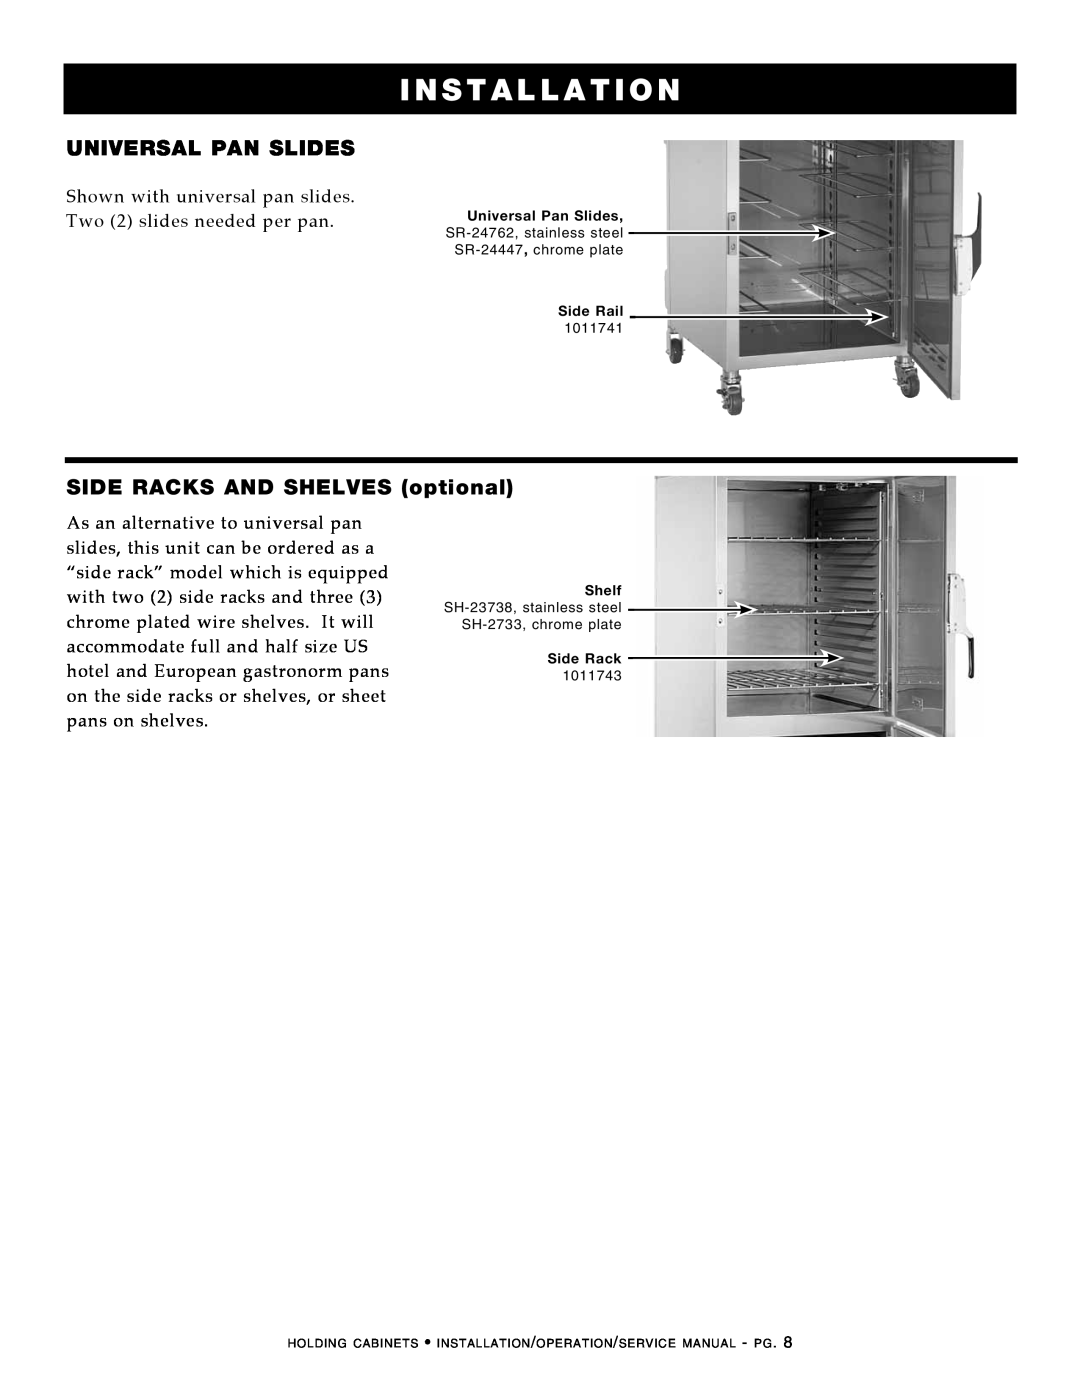 Alto-Shaam 500-S Universal Pan Slides, SIDE RACKS AND SHELVES optional, Two 2 slides needed per pan, Inst A L L A Tio N 